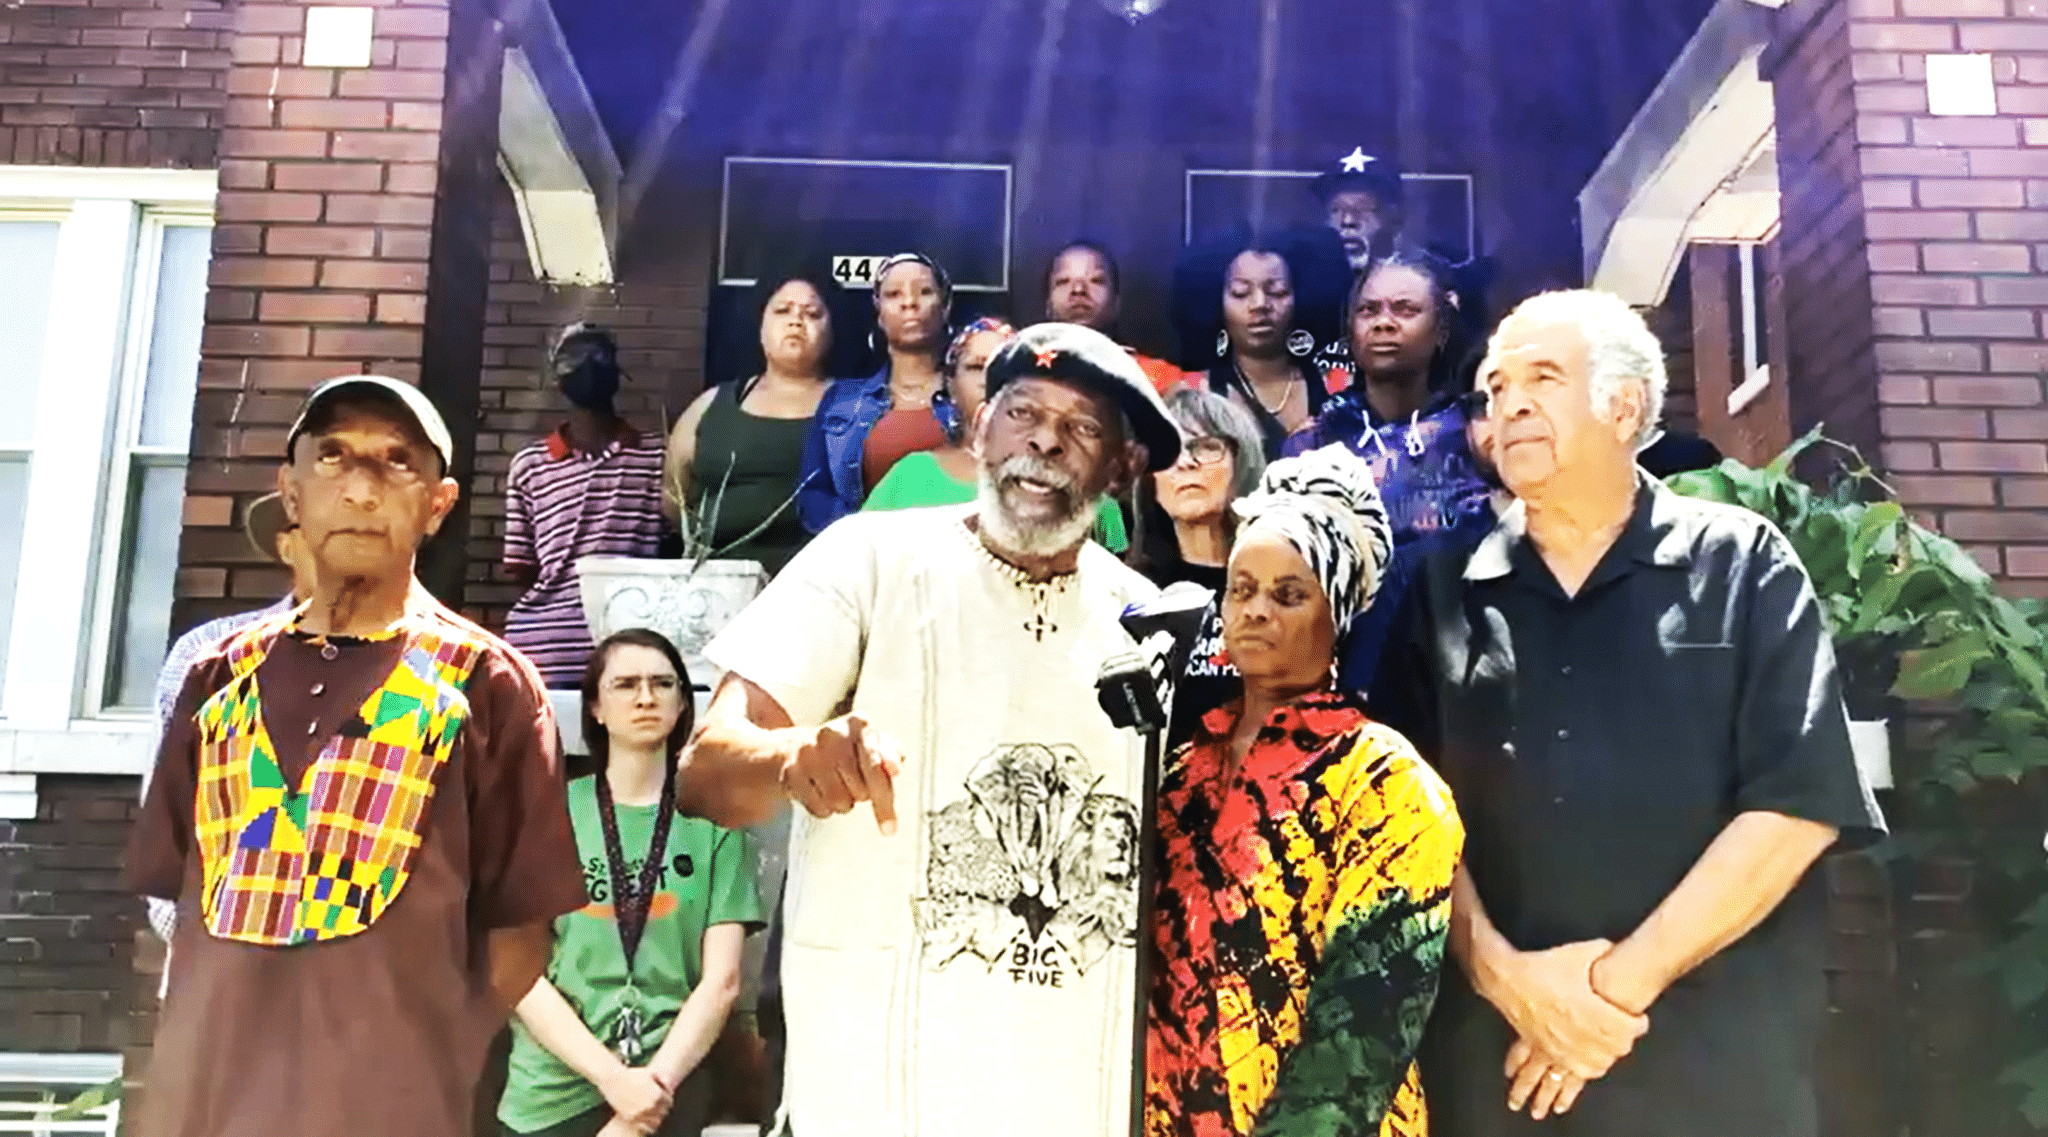 Members and supporters of the African People's Socialist Party stage a demonstration after an FBI raid on the party headquarters and leaders' homes in July 2022. Photo: African People's Socialist Party.